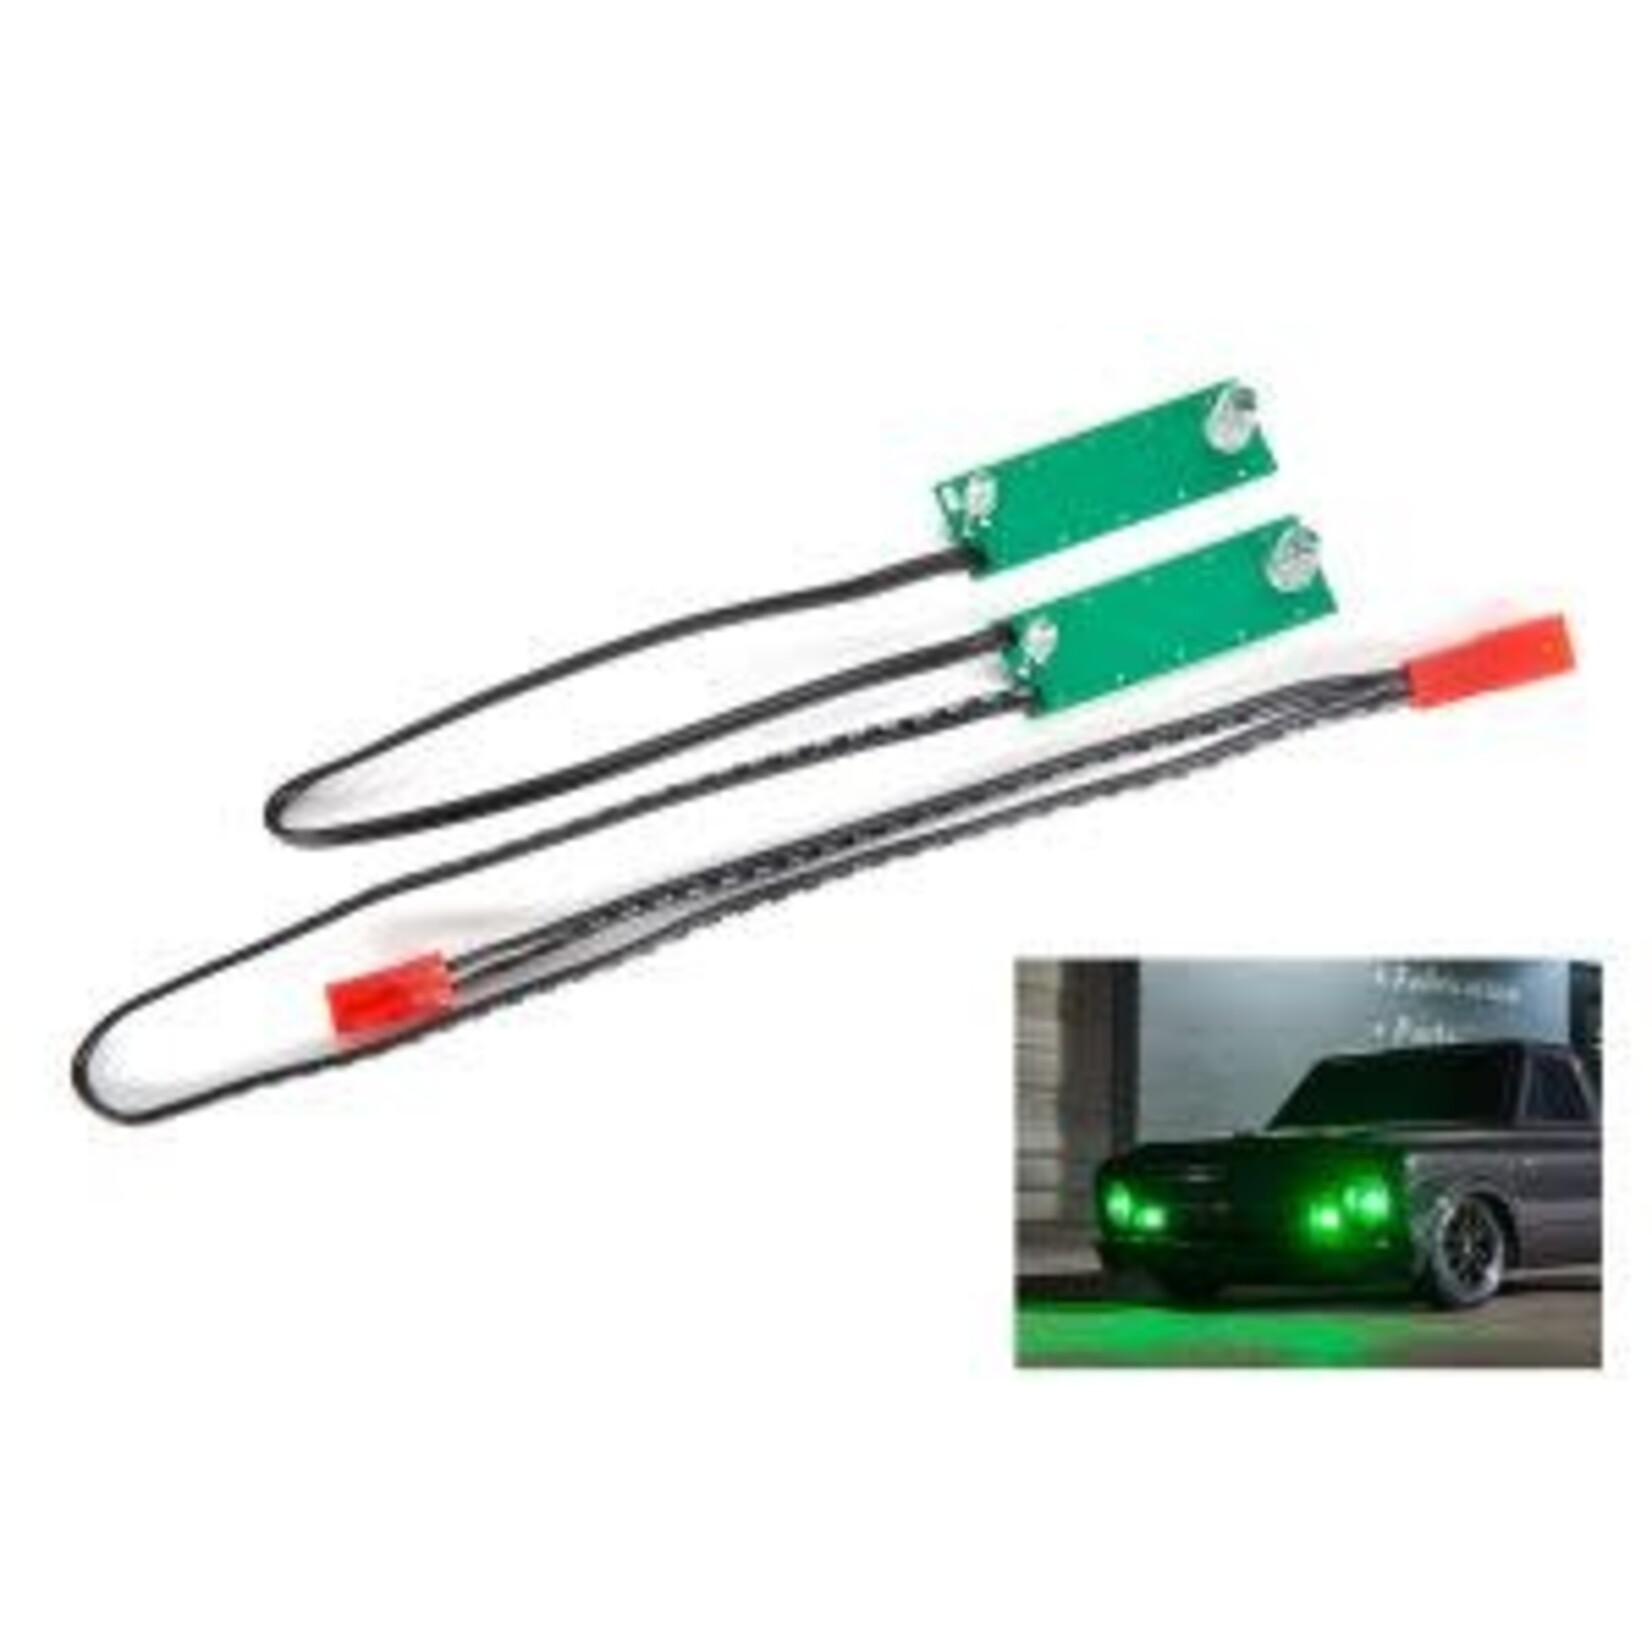 Traxxas 9496G LED light set, front, complete (green) (includes light harness, power harness, zip ties (9))